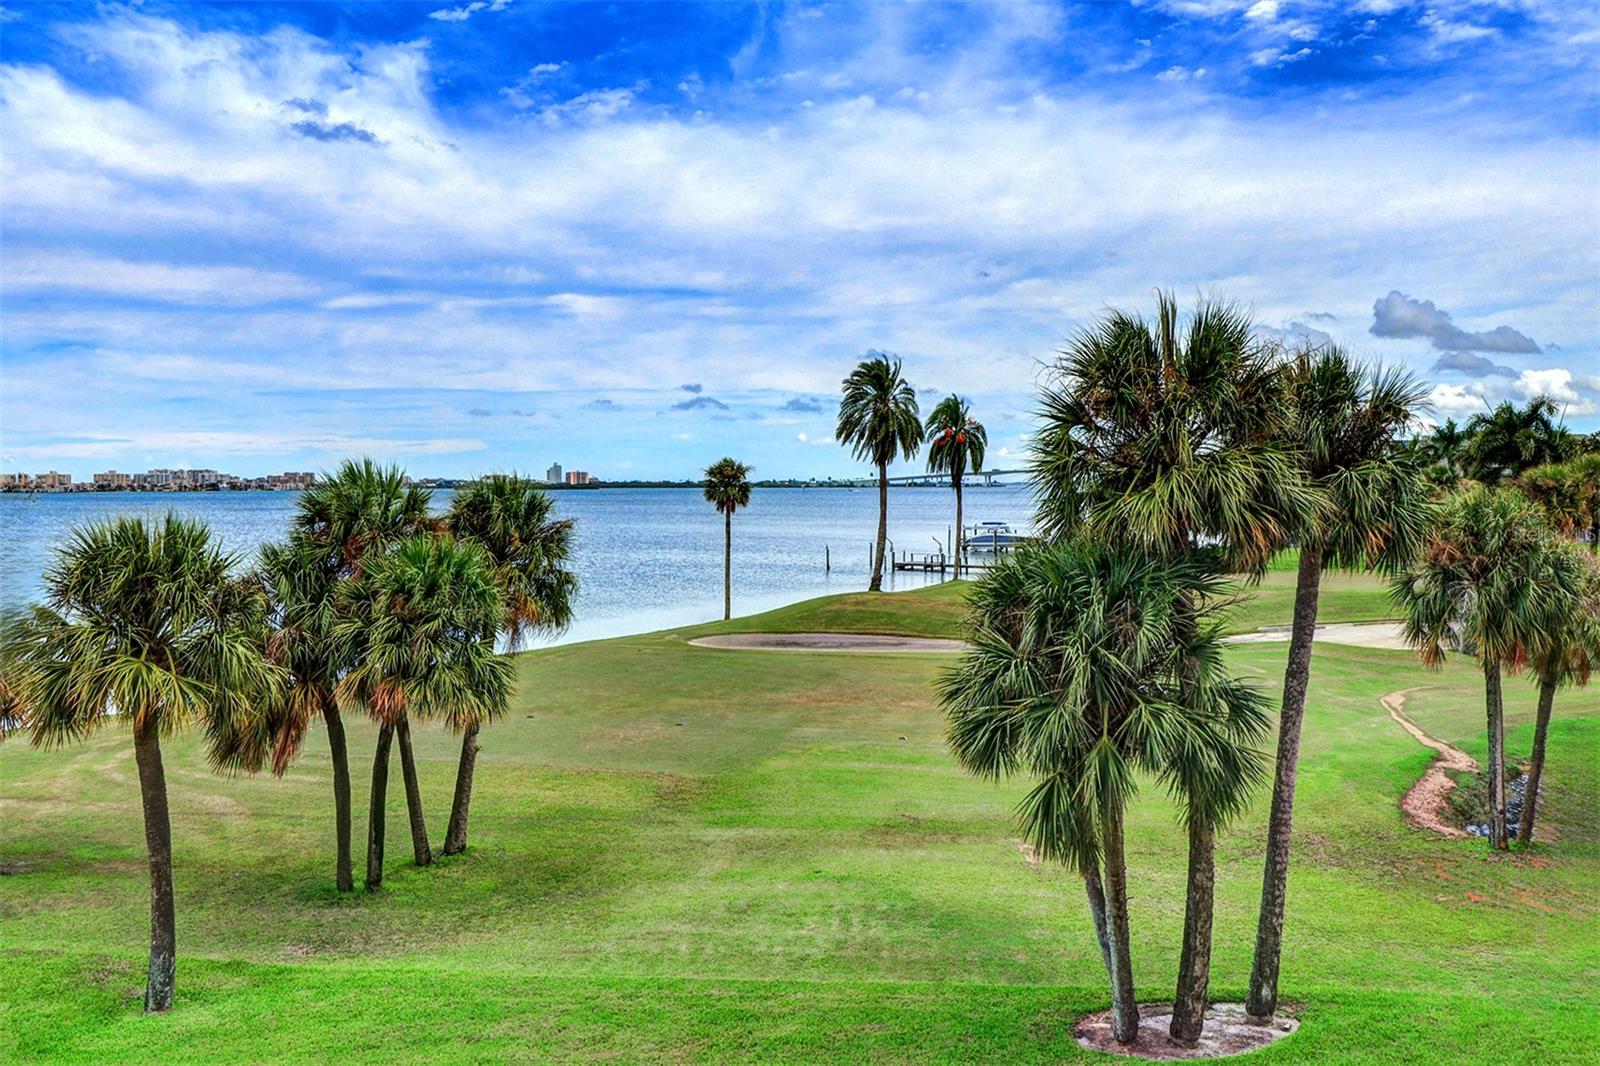 View overlooking 15th tee of Belleair Country Club to the water